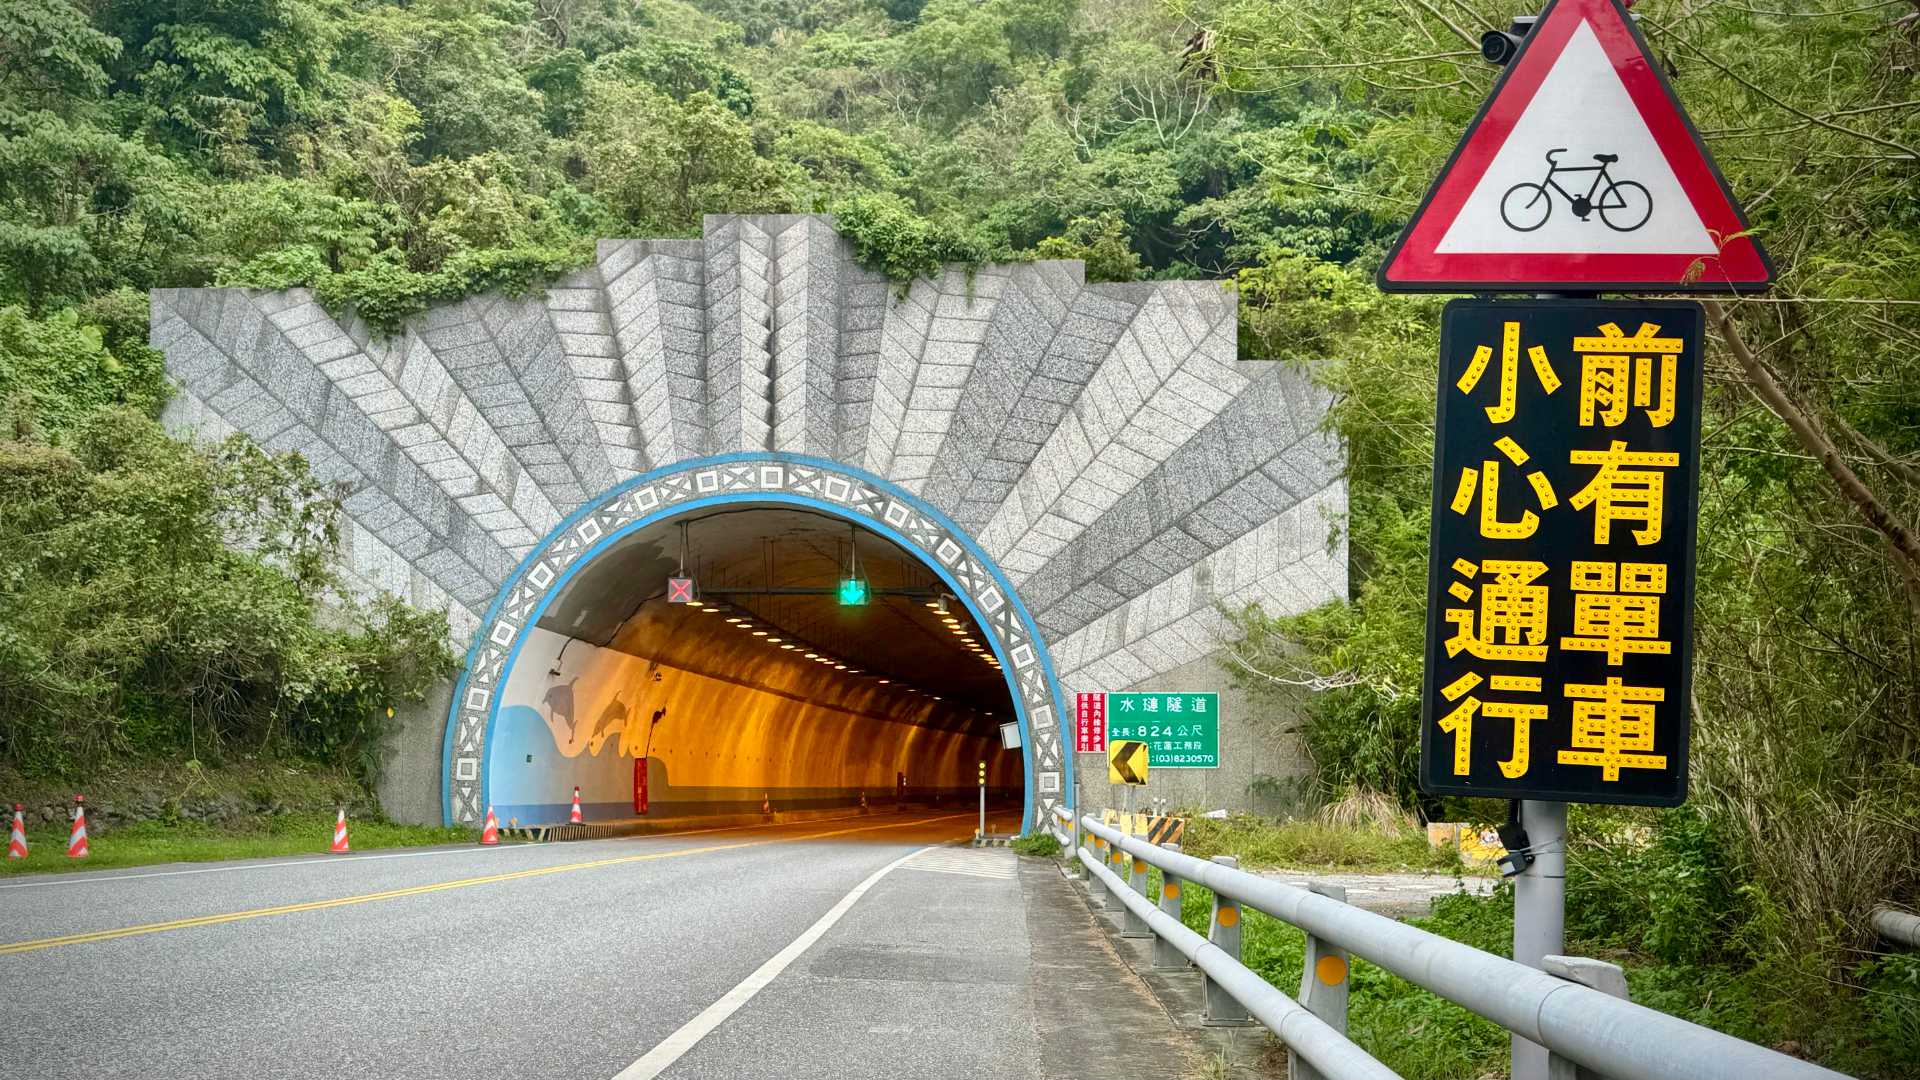 A two-lane road tunnel with art deco-style decorative details around the tunnel entrance.